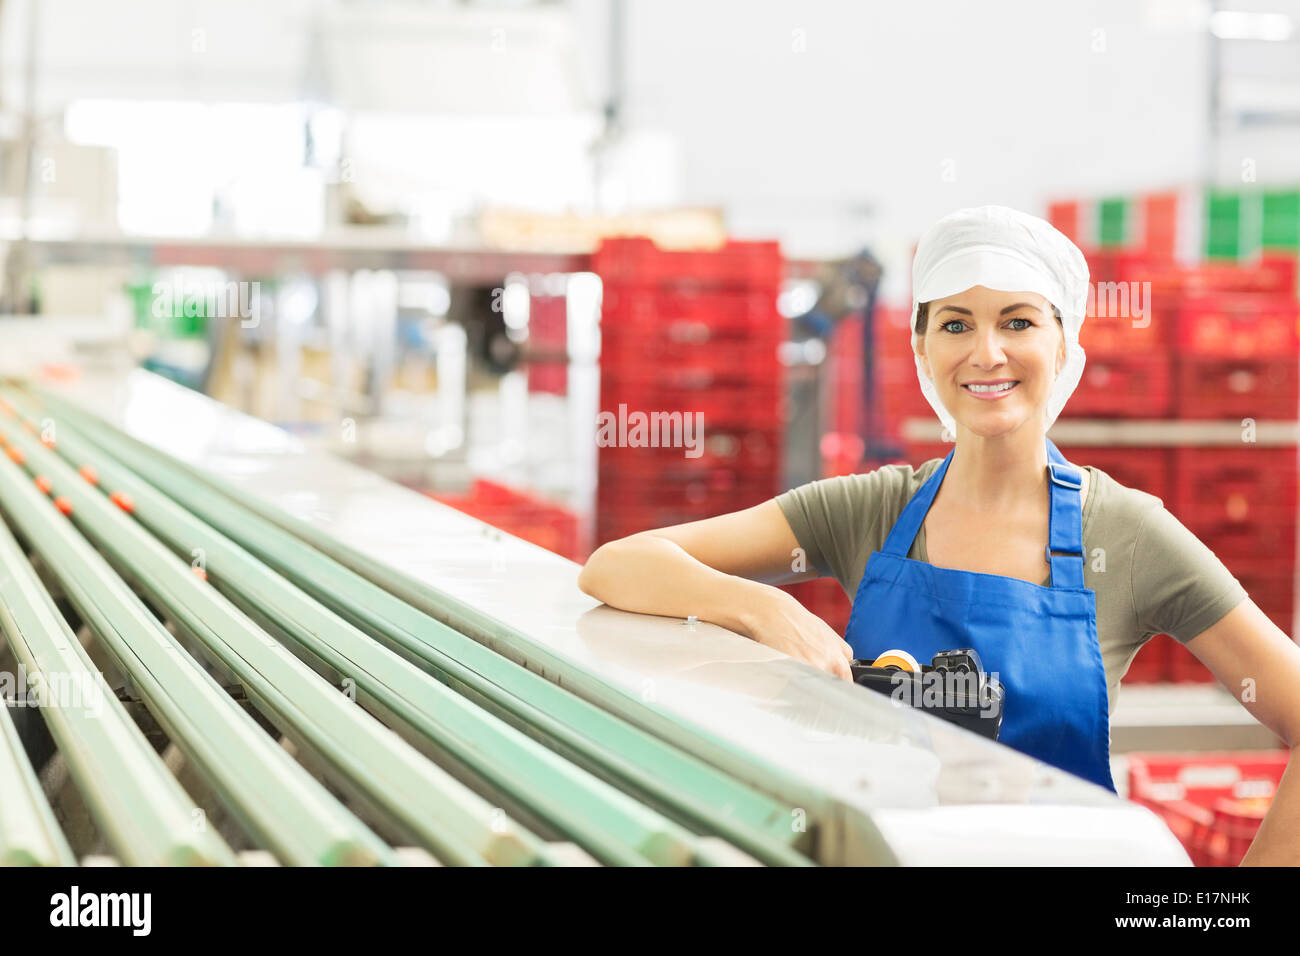 Portrait of confident worker in food processing plant Stock Photo